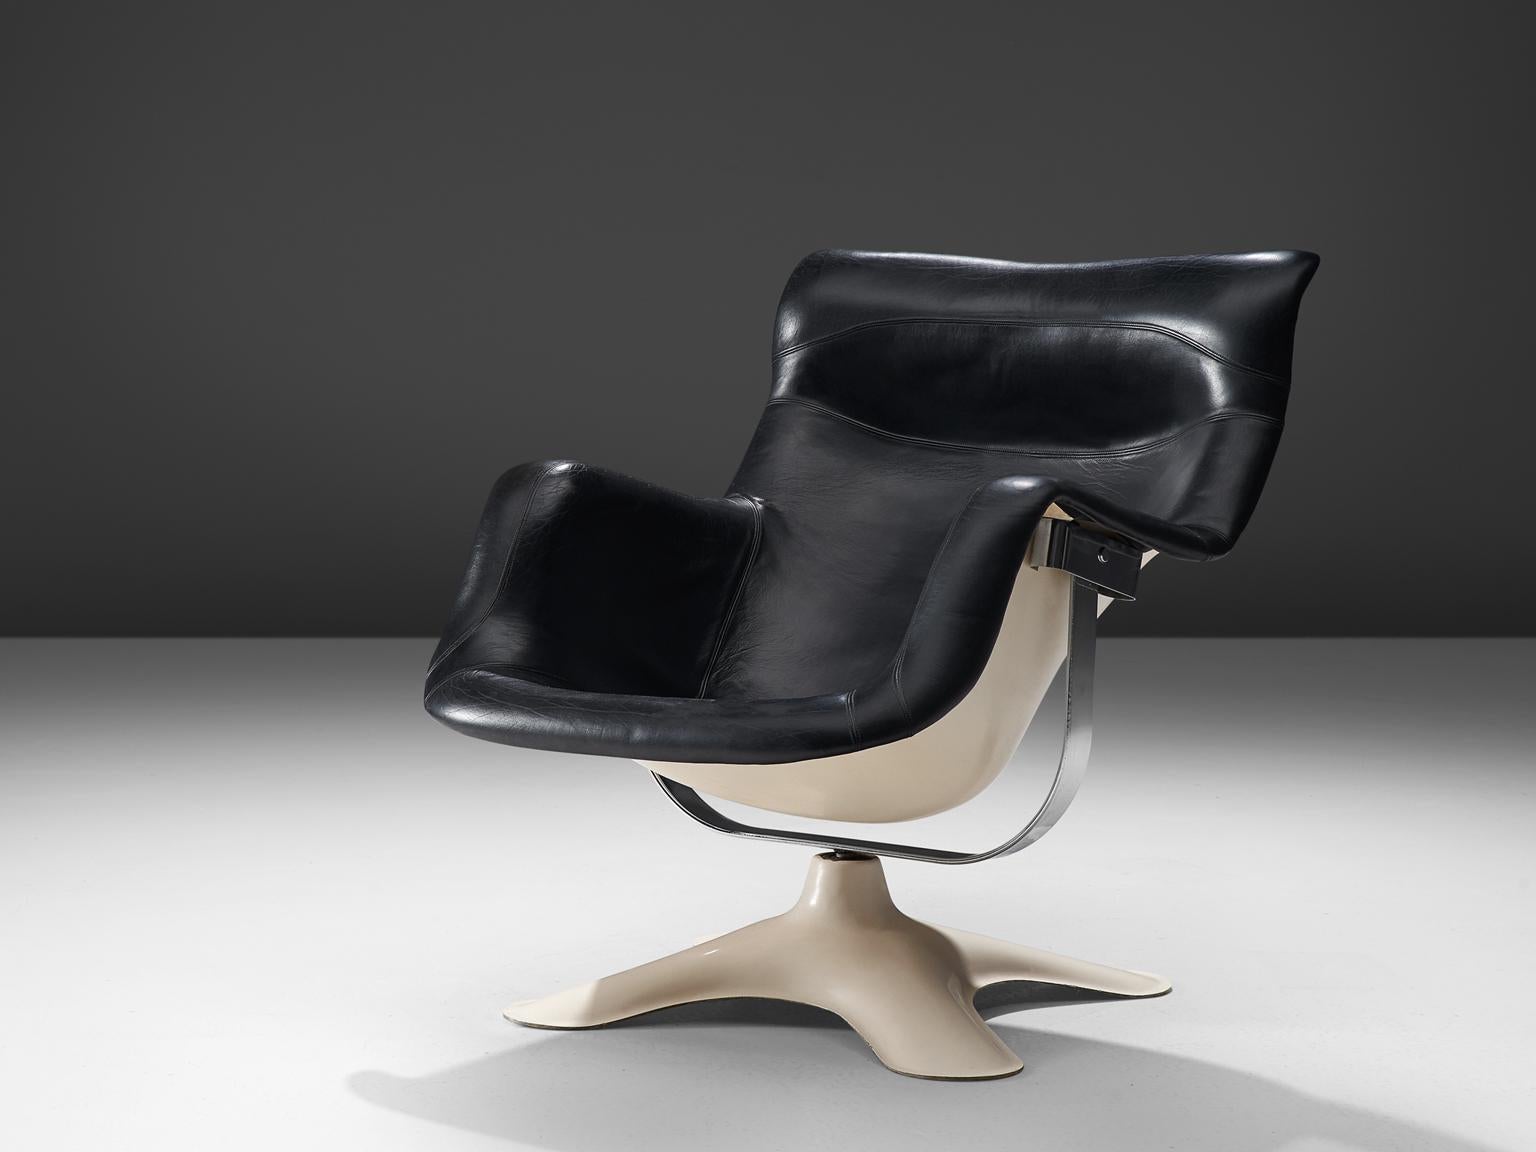 Yrjo Kukkapuro for Haimi, 'Karuselli' lounge chair, black leather, white fiberglass, Finland, 1960s.

Organic shaped lounge chair by Finnish designer Yrjo Kukkapuro. This chair consist of a moulded plastic shell with thick leather cushions on the